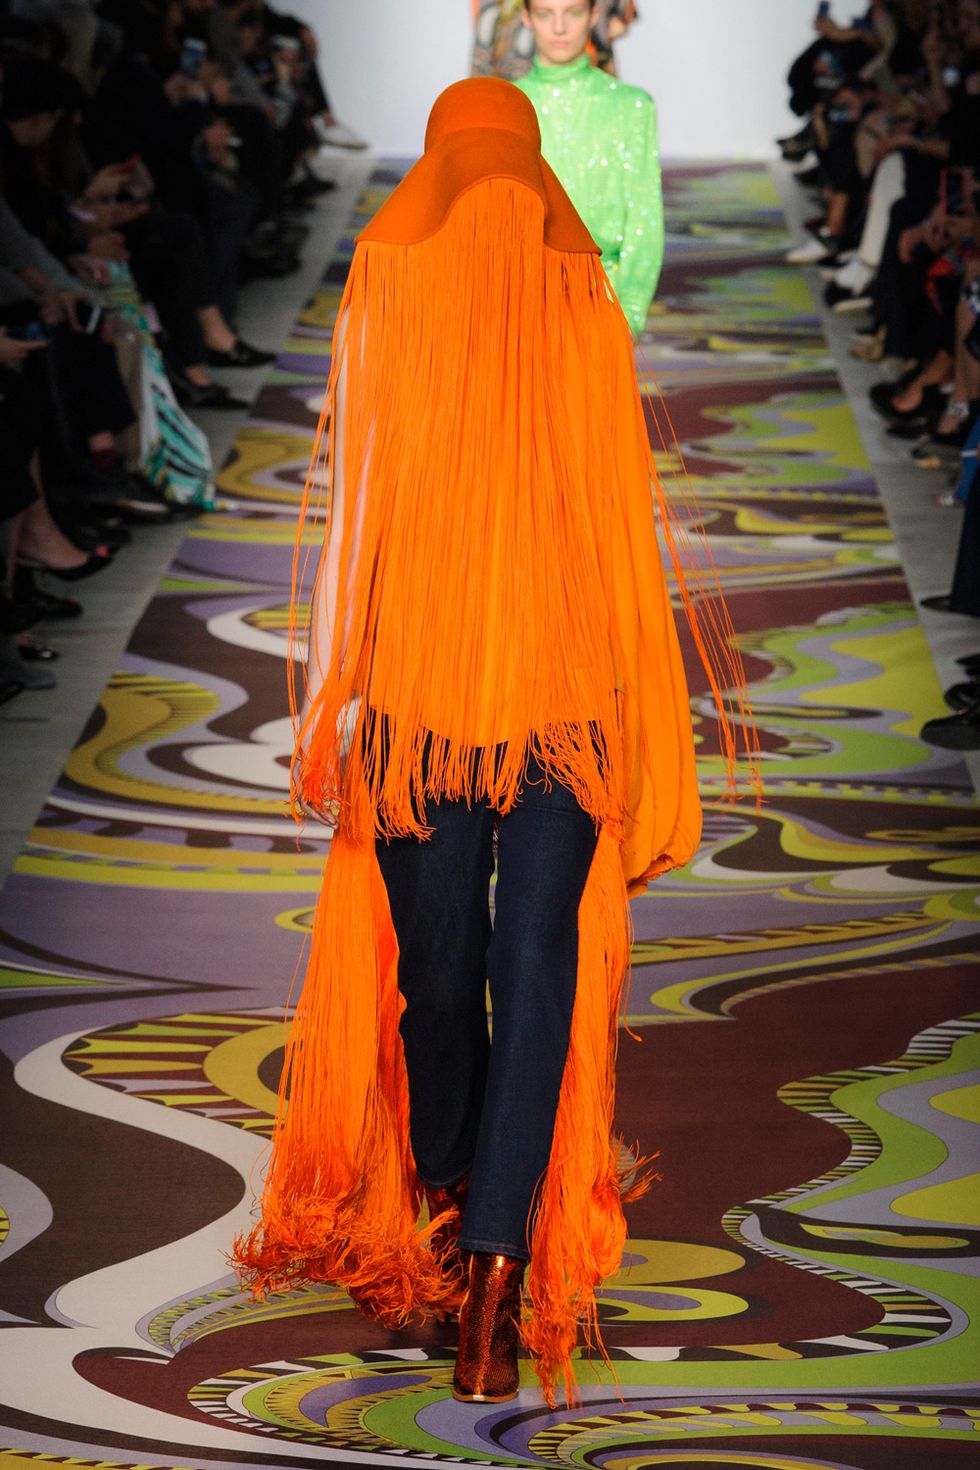 6 of the weirdest trends from Paris Couture fashion week so far